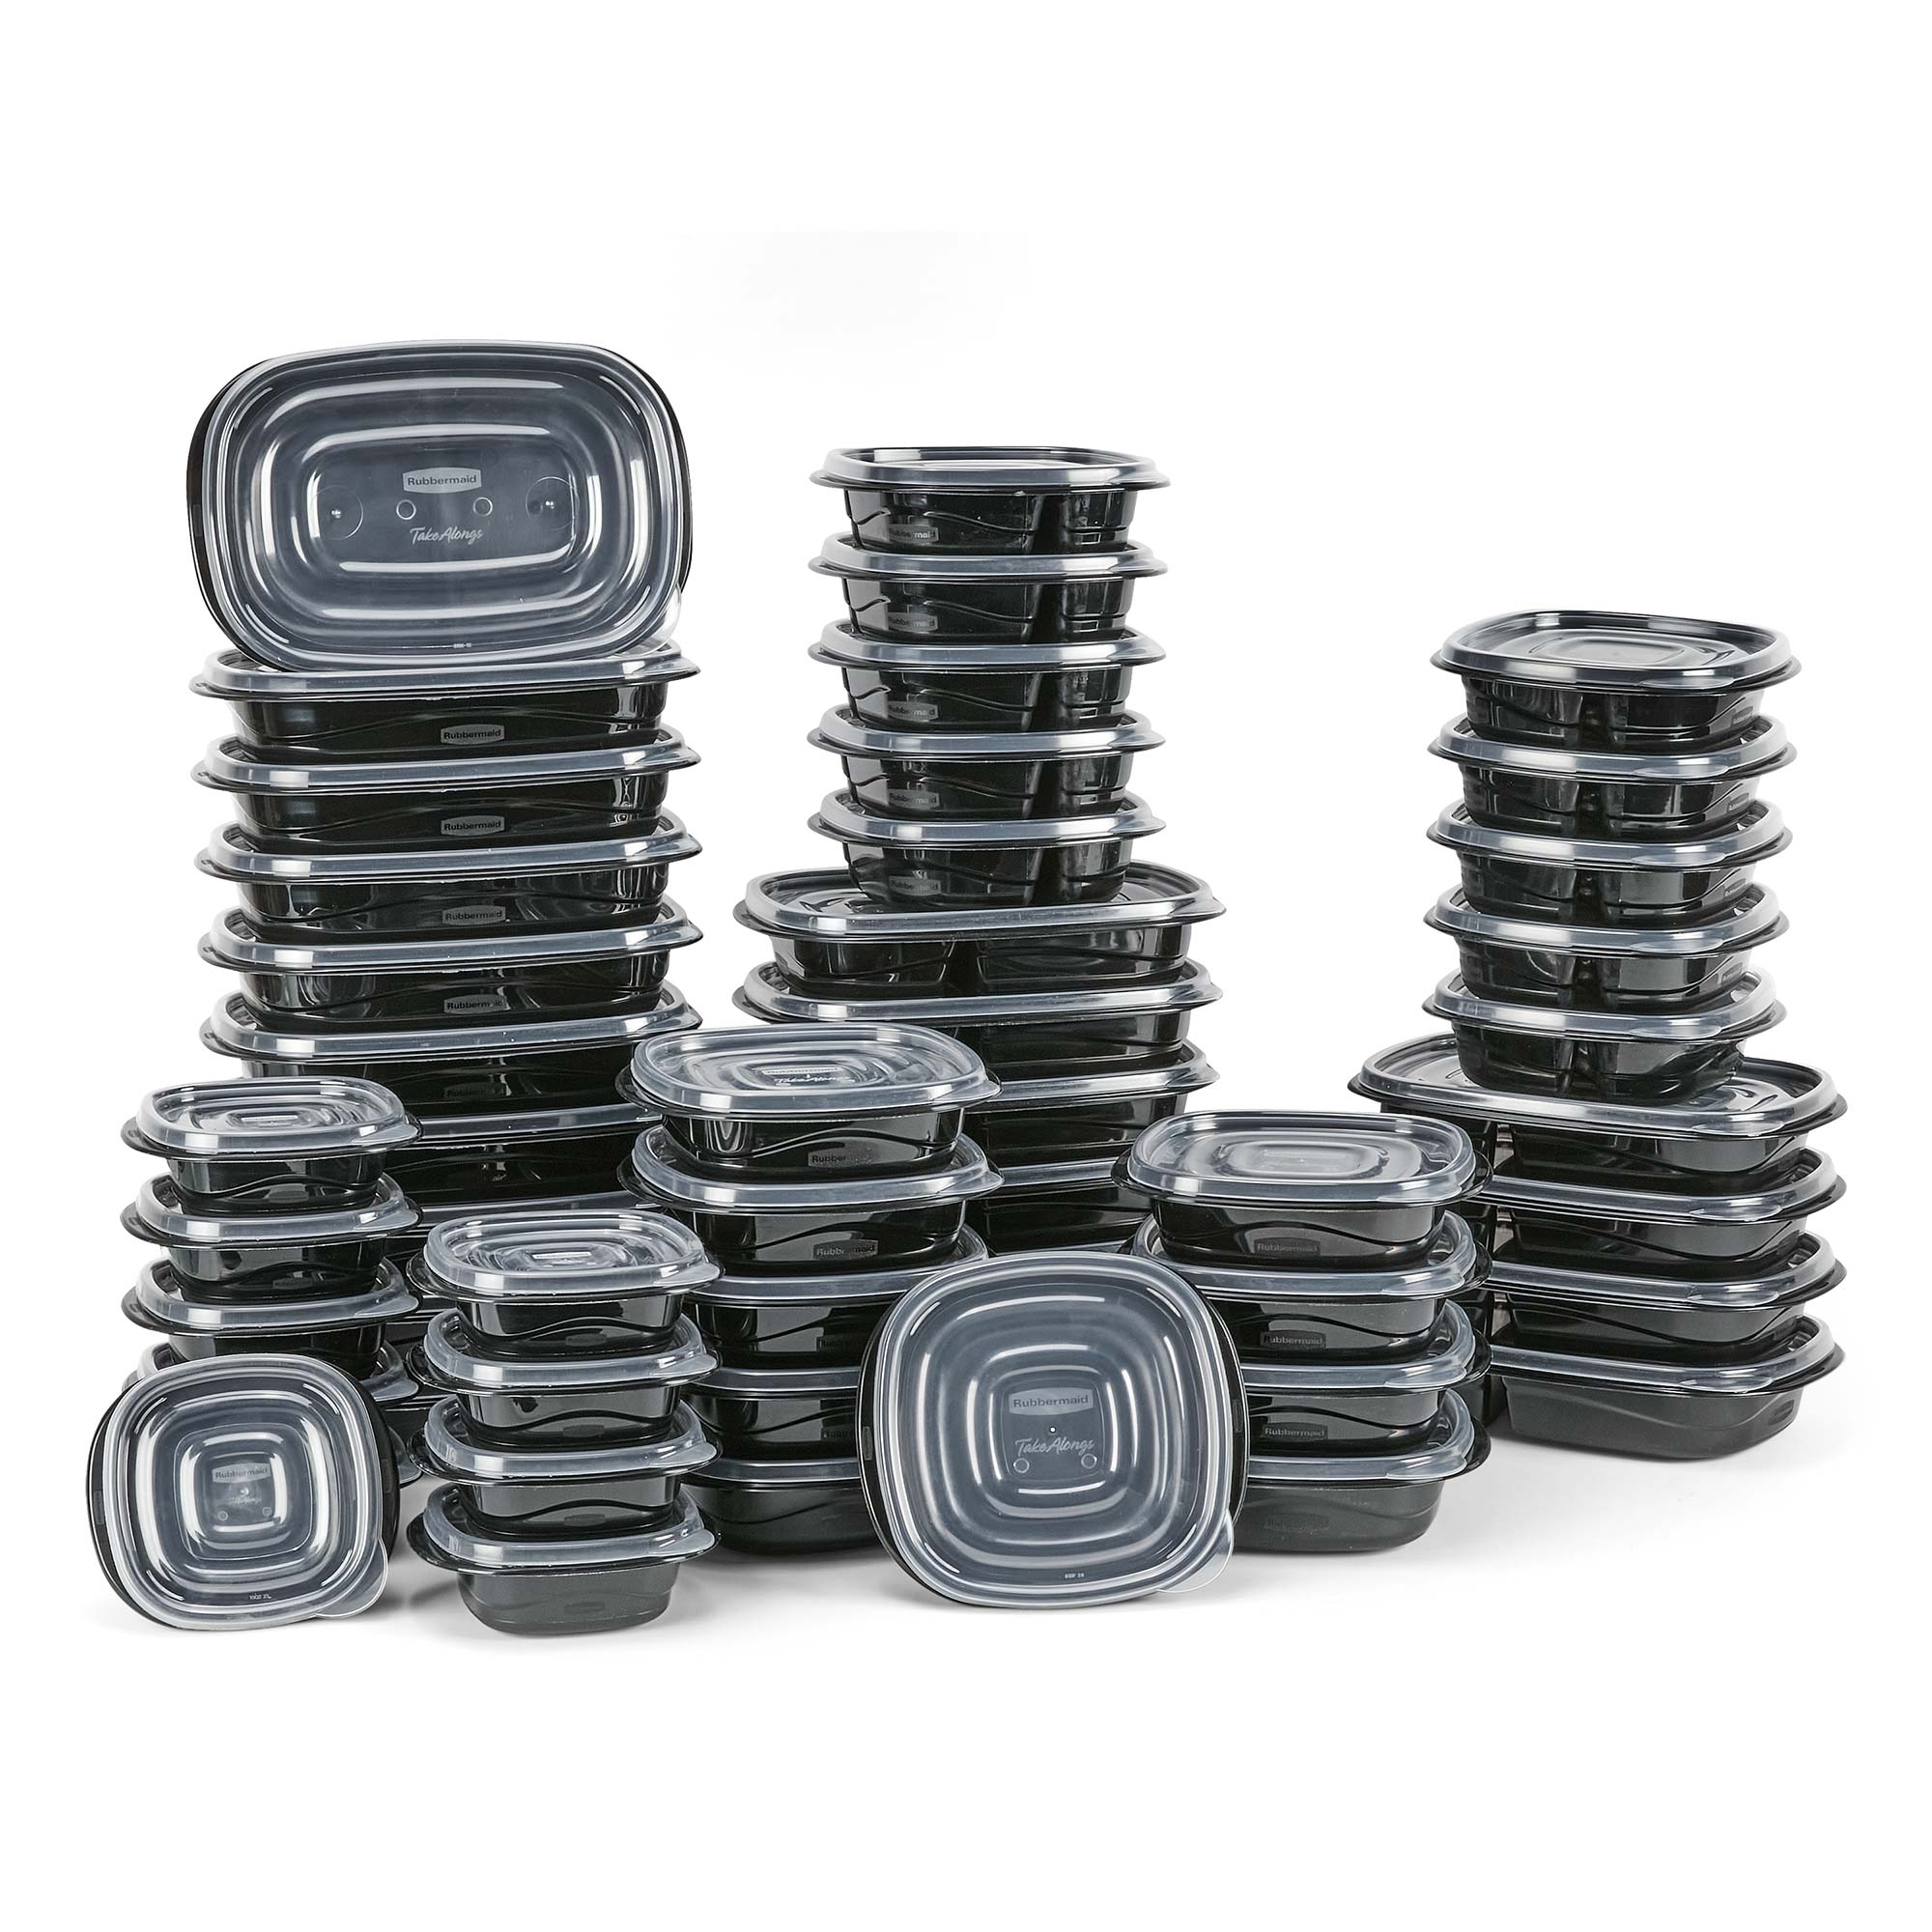 Rubbermaid 100-Count Meal Prep Set